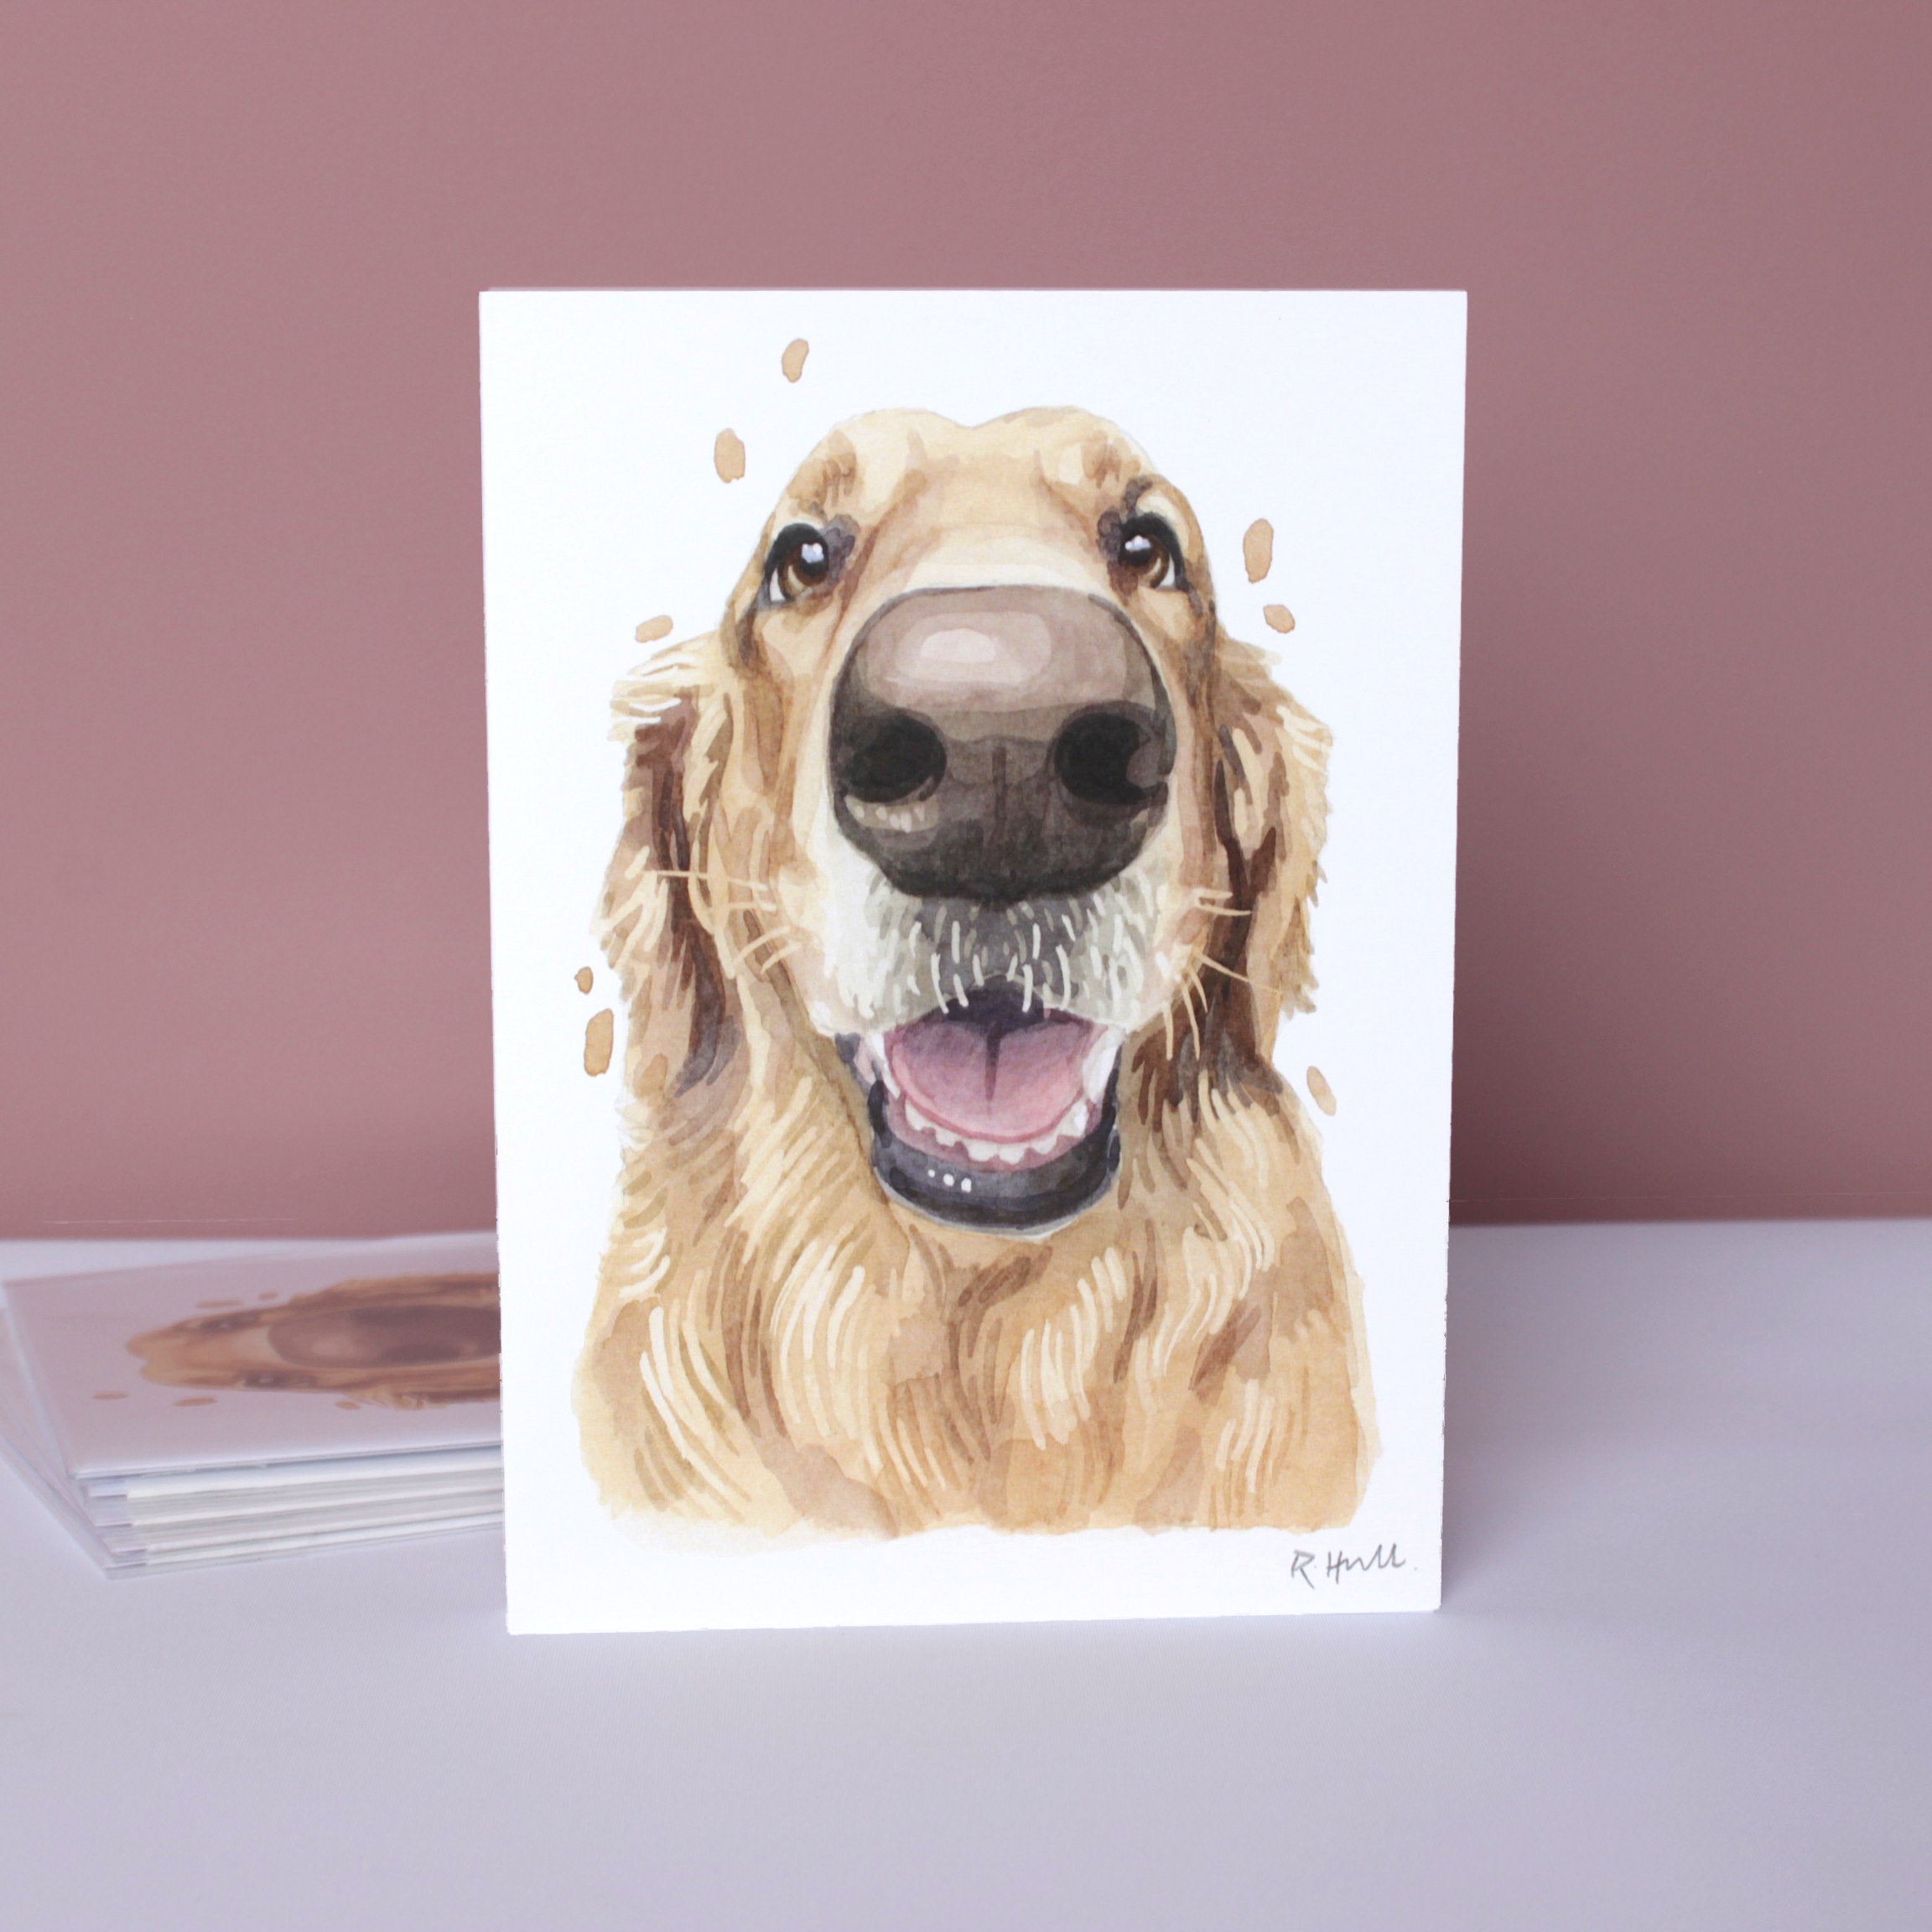 Pack of 5 Golden Retriever All Occasion Cards, Cute Goldie Boop Birthday Greeting Card